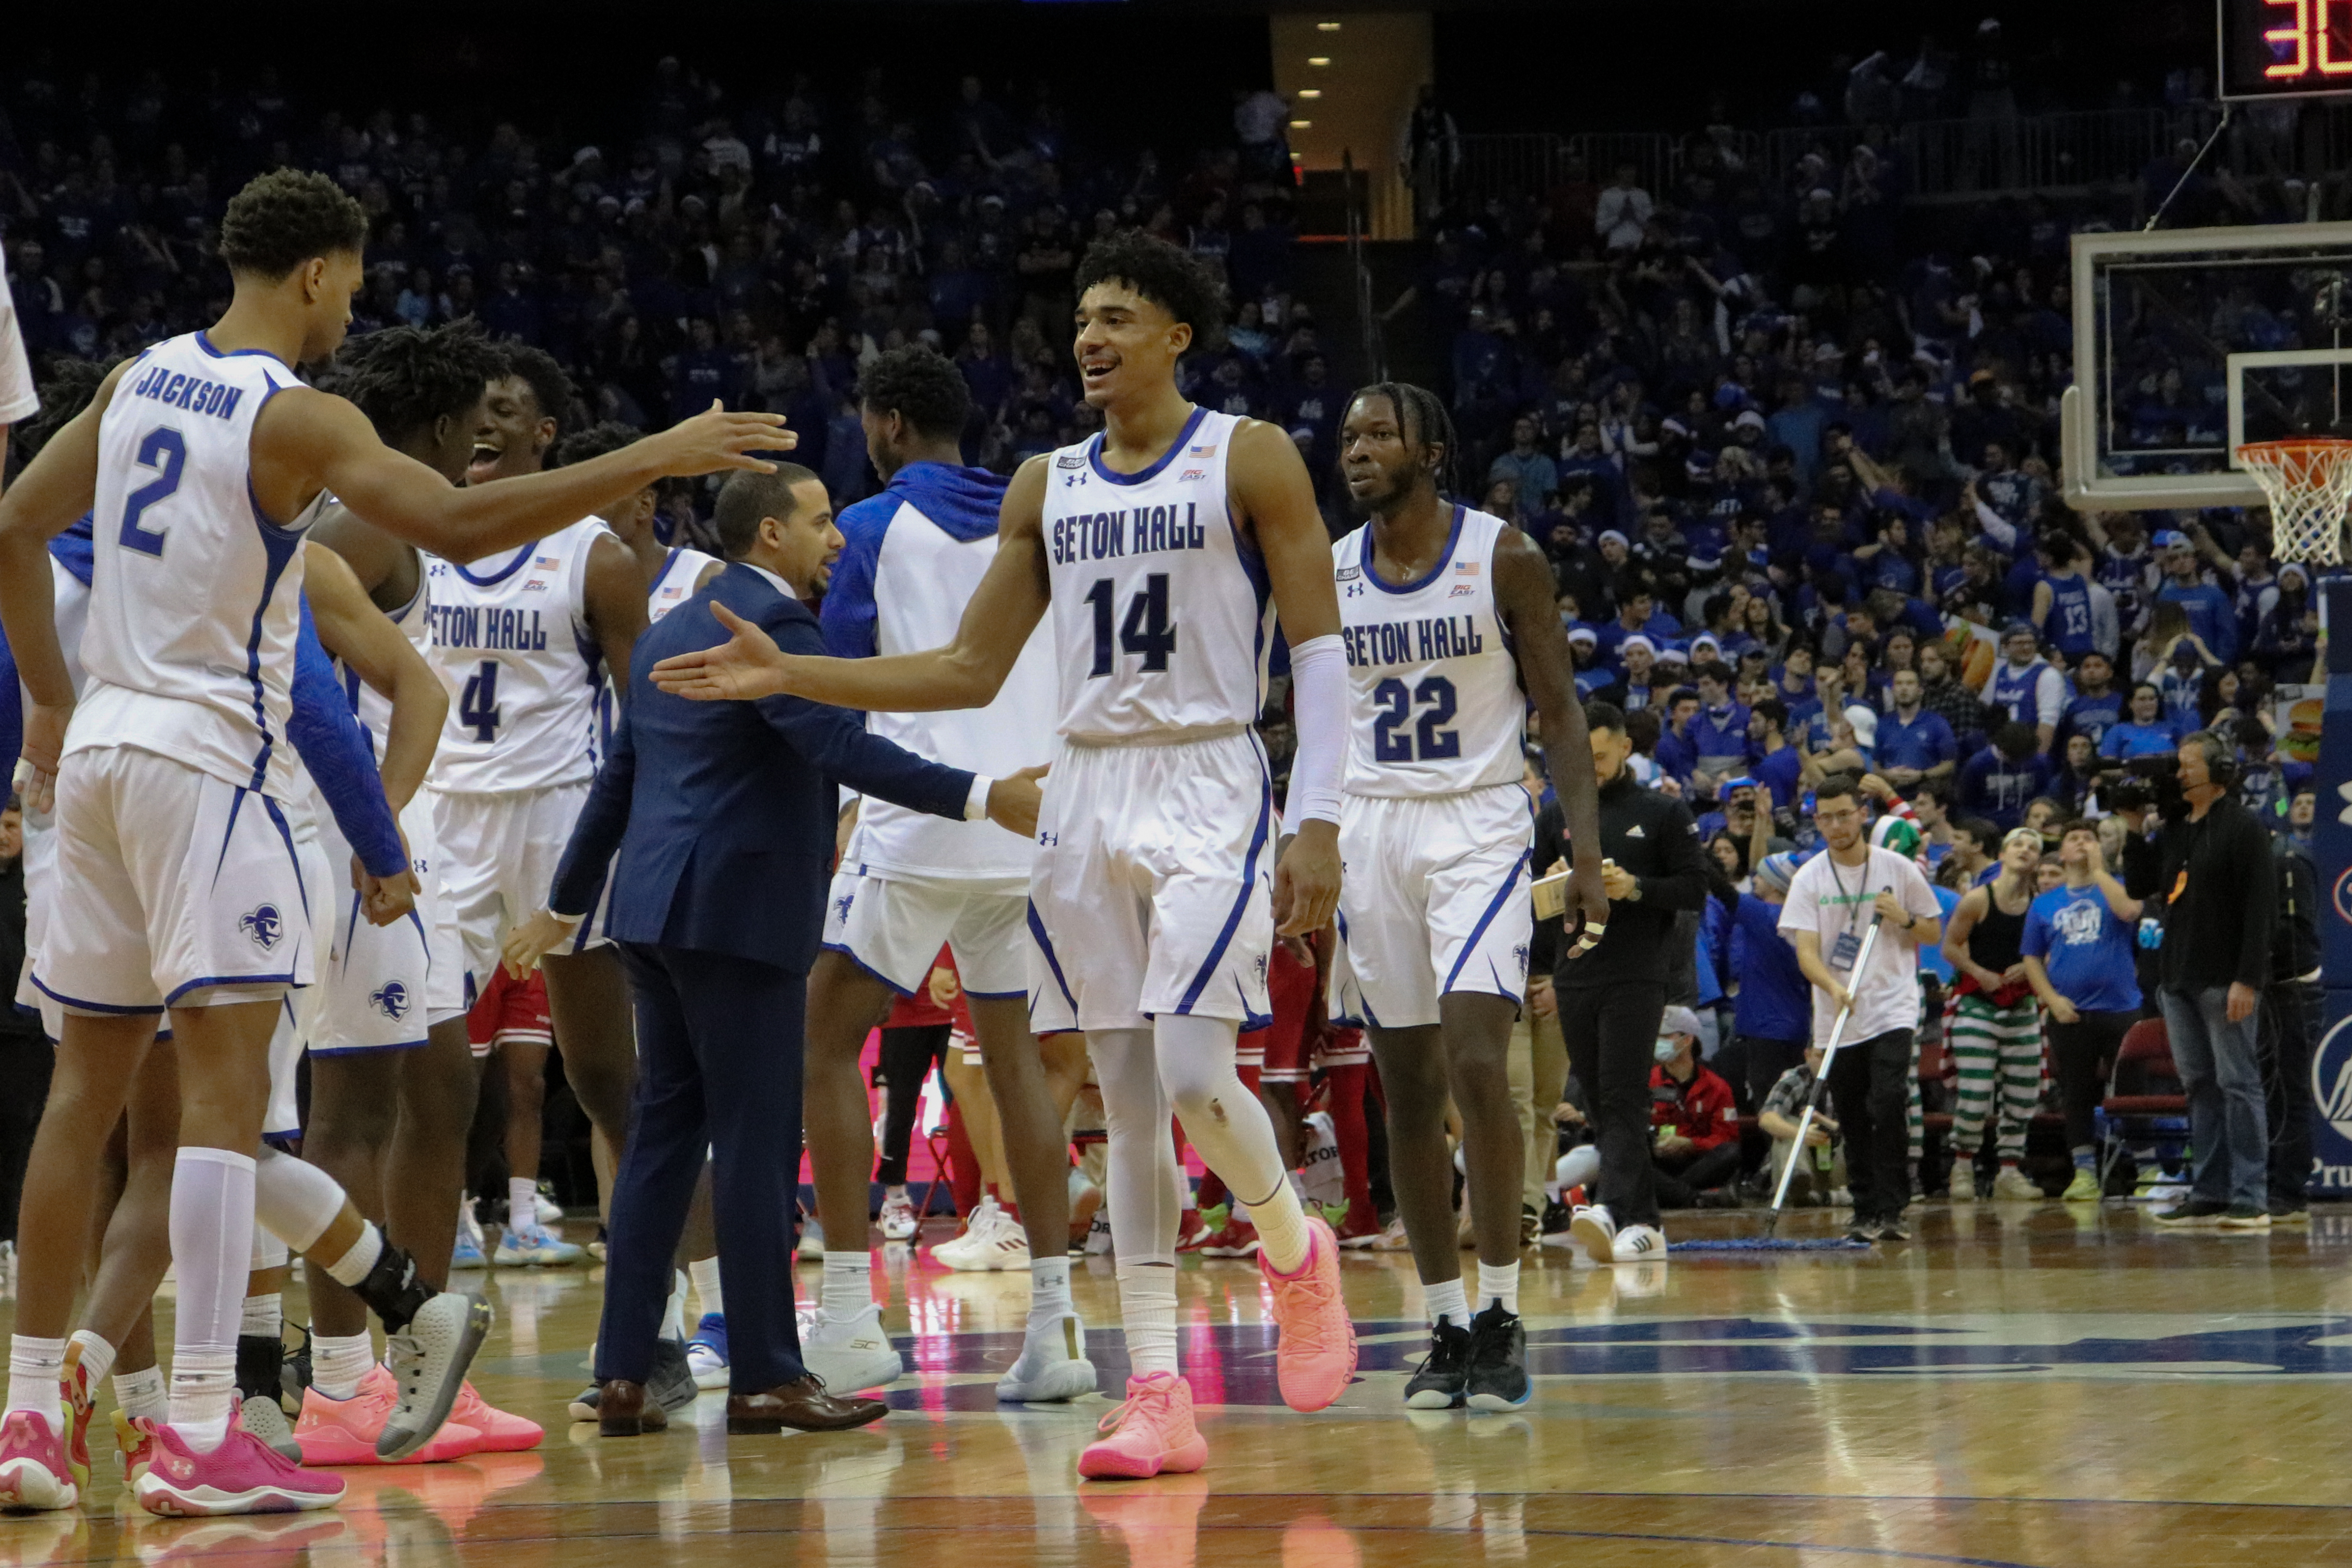 The Seton Hall men's basketball team high fives during a home game.